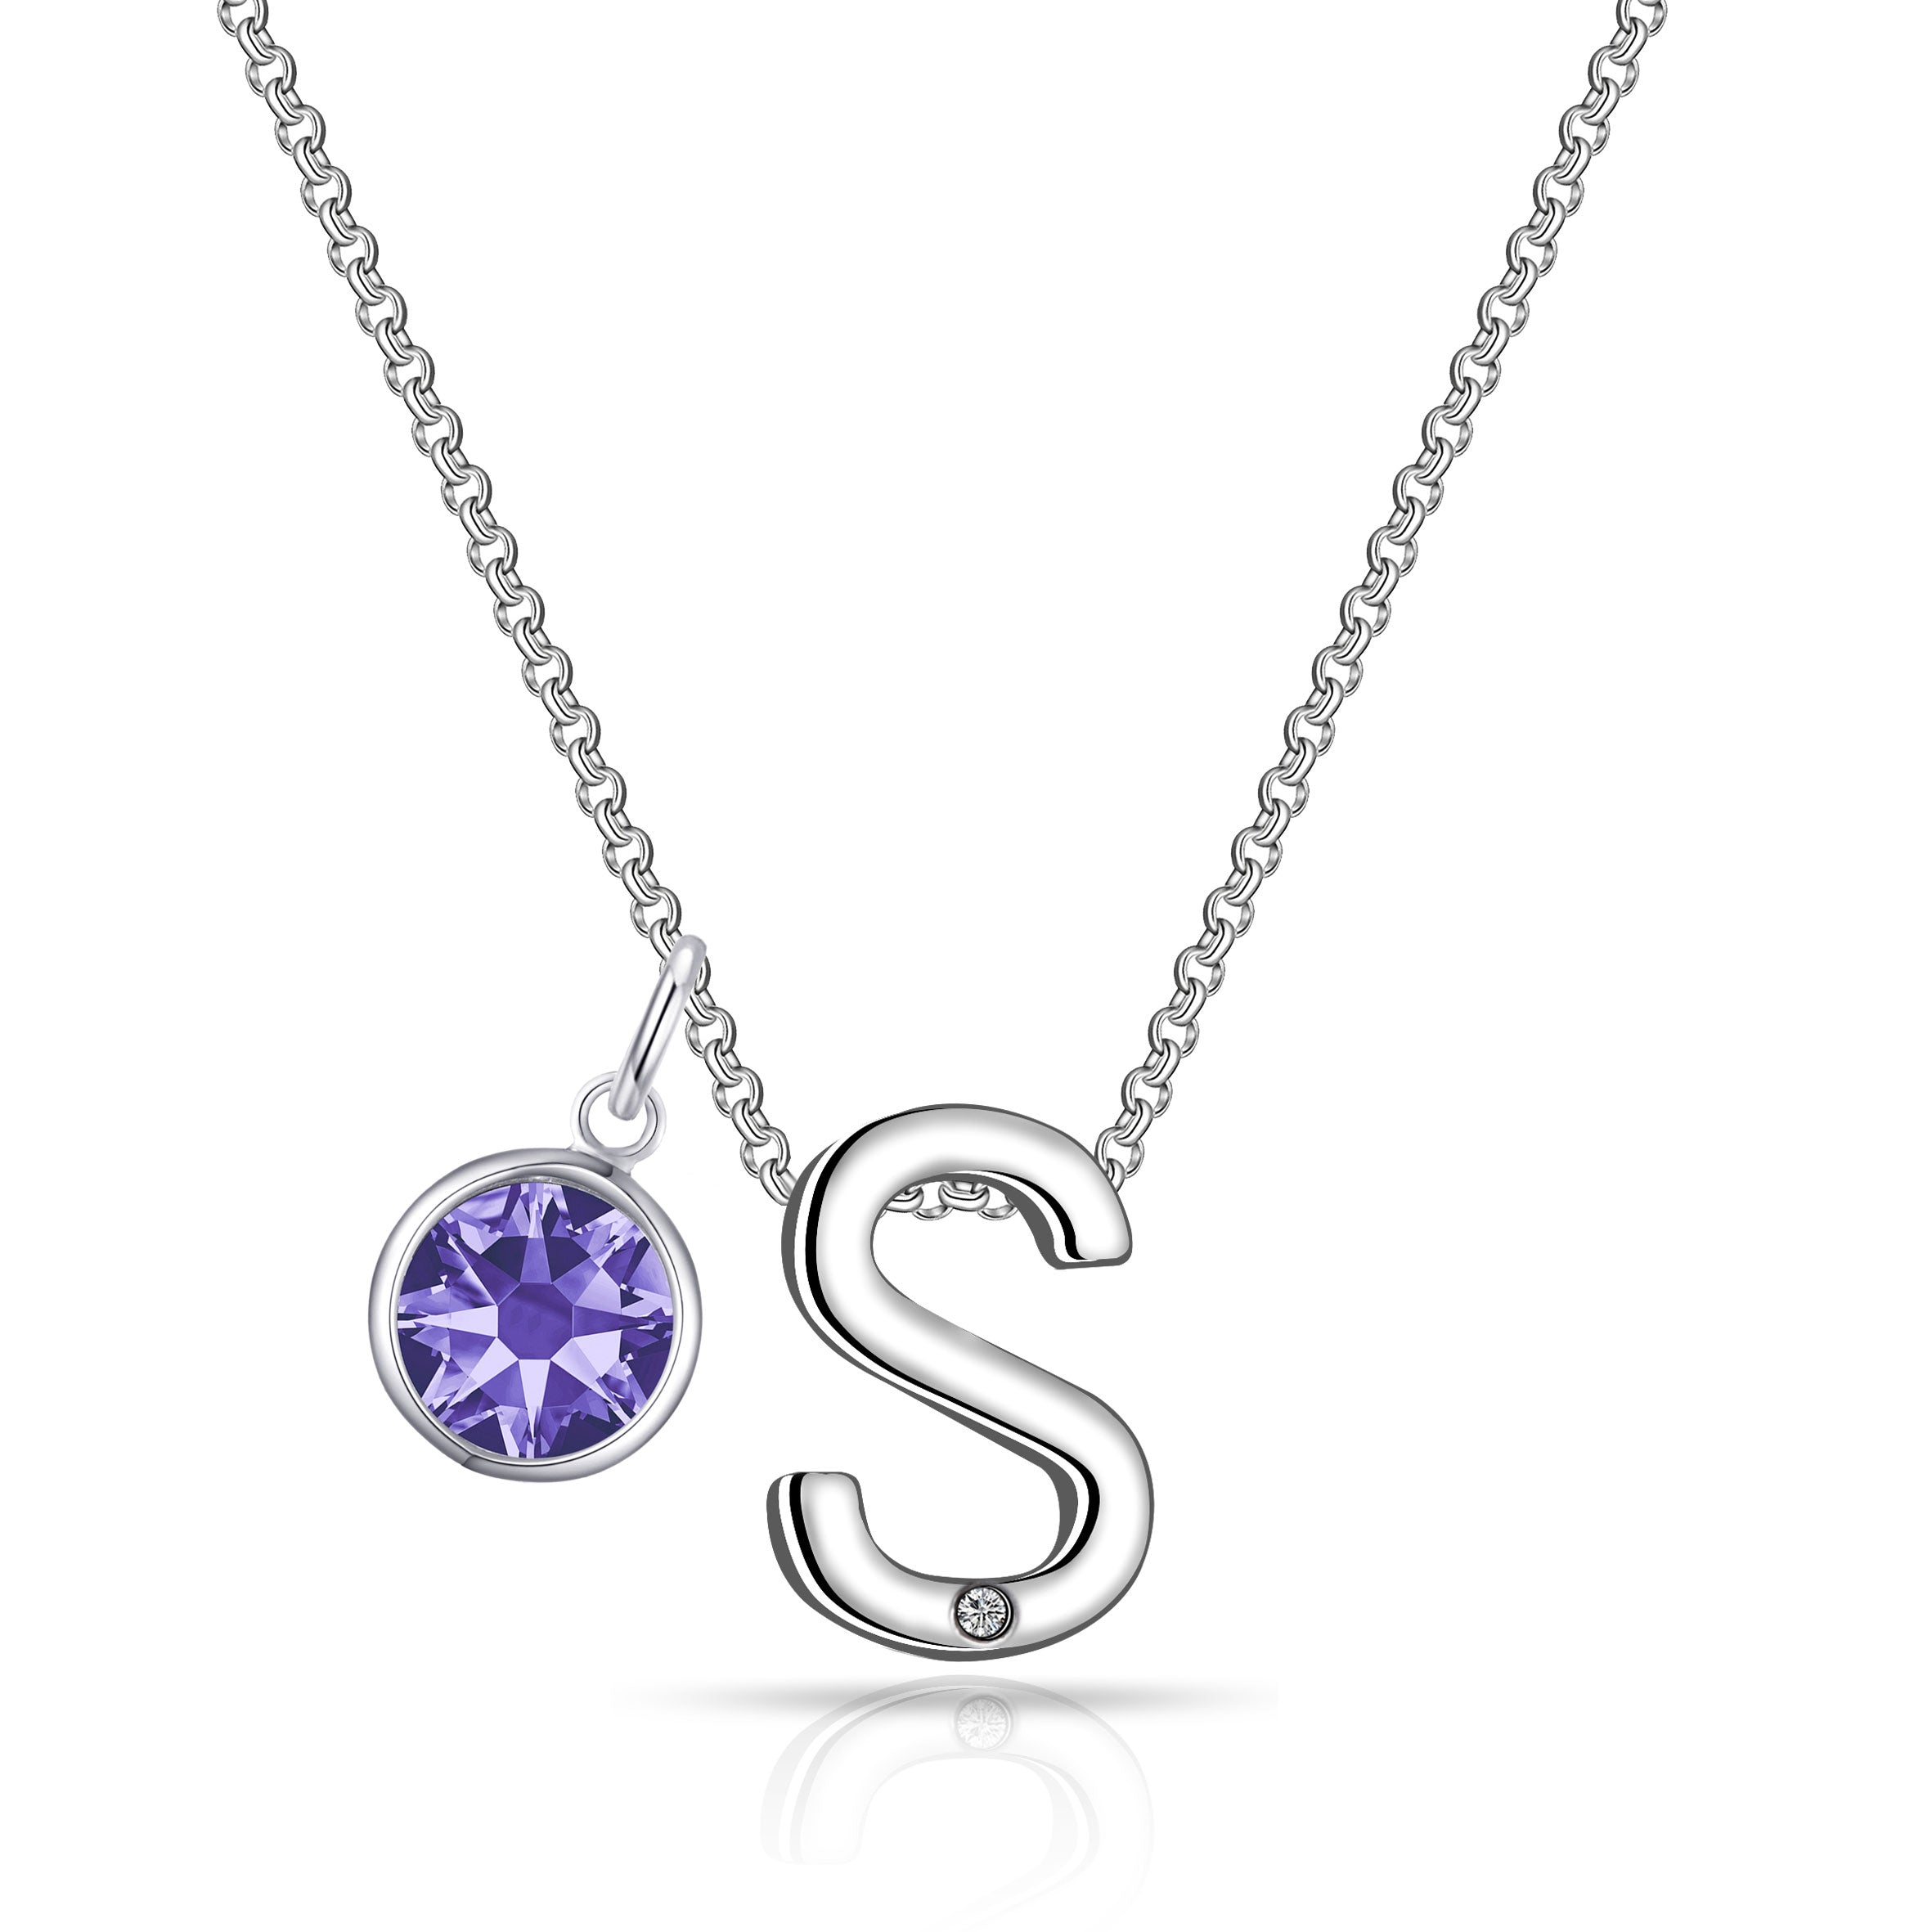 Initial S Necklace with Birthstone Charm Created with Zircondia® Crystals